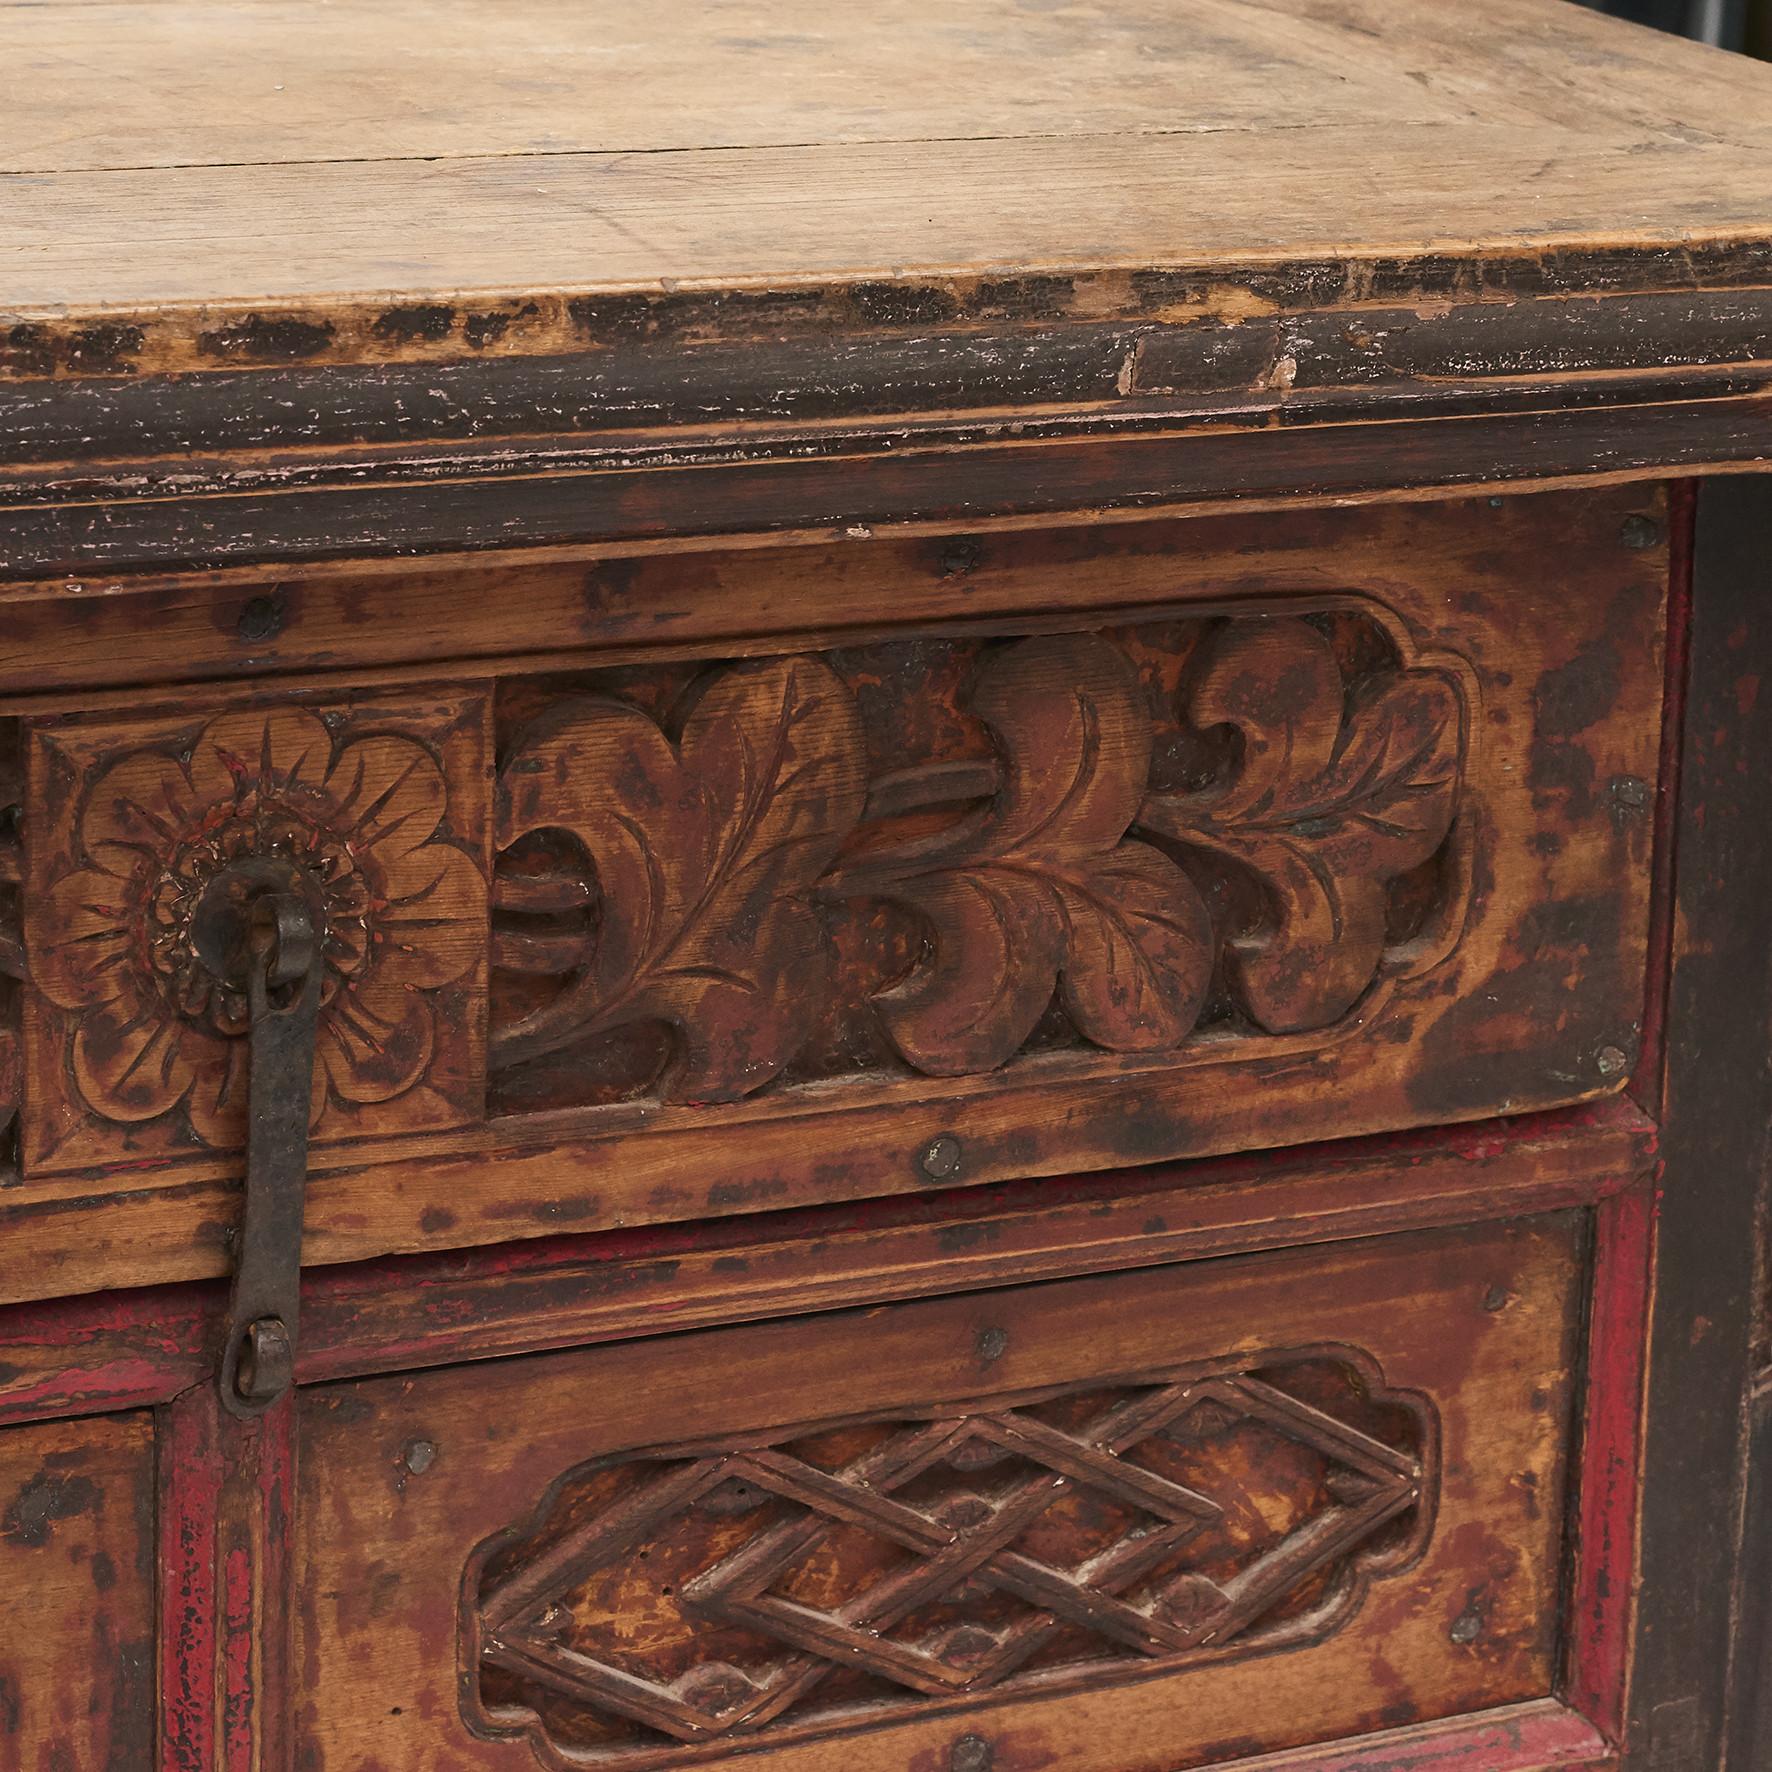 16th-17th Century Chinese Pine Center Table with Carvings and Decorations In Good Condition For Sale In Kastrup, DK